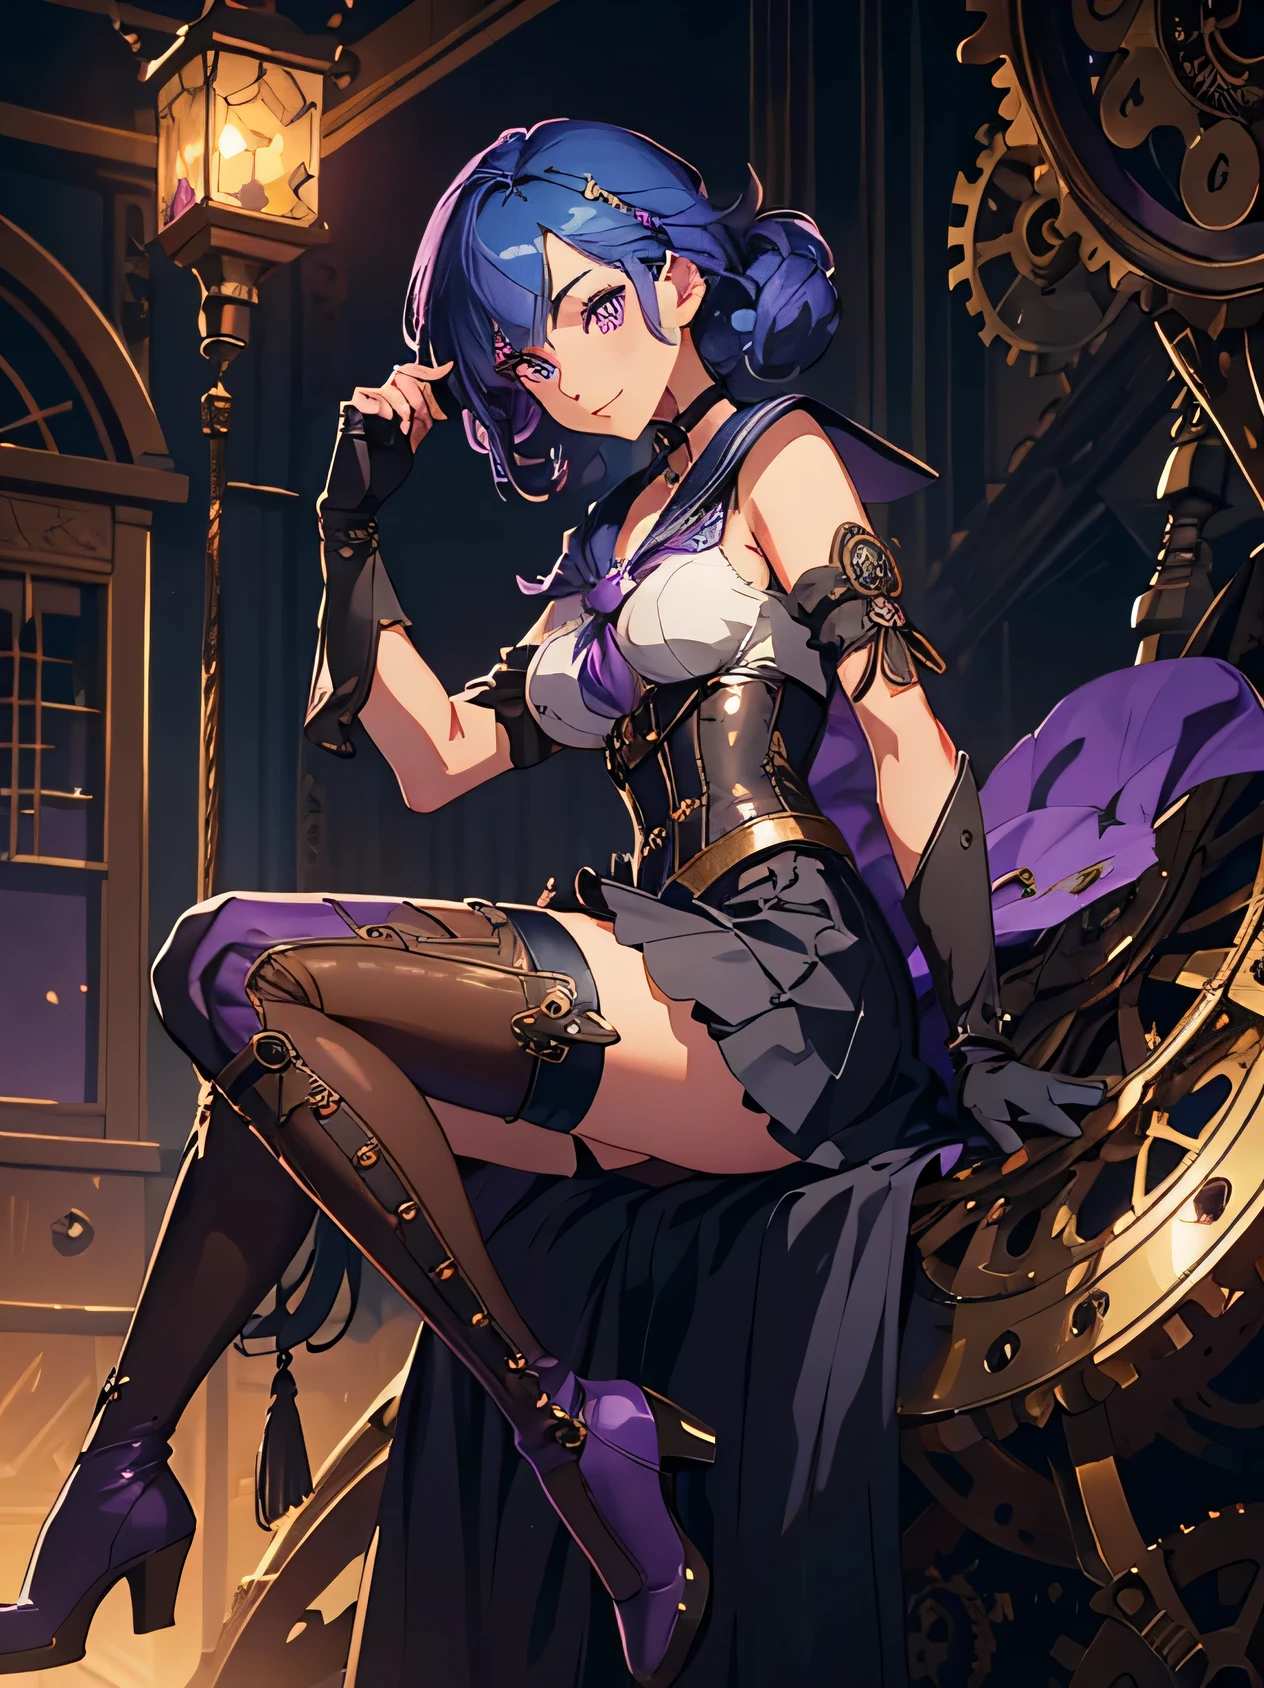 masterpiece, high quality, illustration, extremely detailed, steampunk town, wearing on street, 1_women, (bright blue hair), medium length hair, cute bangs, flowing hair, (exotic skin_complexion:1.4),mature, tall, beautiful, exotic, elegant, slim, (((sailor collar))), black thigh highs, choker, medium bust, (brown steampunk corset), black Lolita style skirt, knee high brown boots with laces, black elegant elbow gloves, diamond shaped eyes, (((purple eyes))), dark_eyeliner, long_eyelashes), natural dynamic lighting, smiling, happy, steampunk,